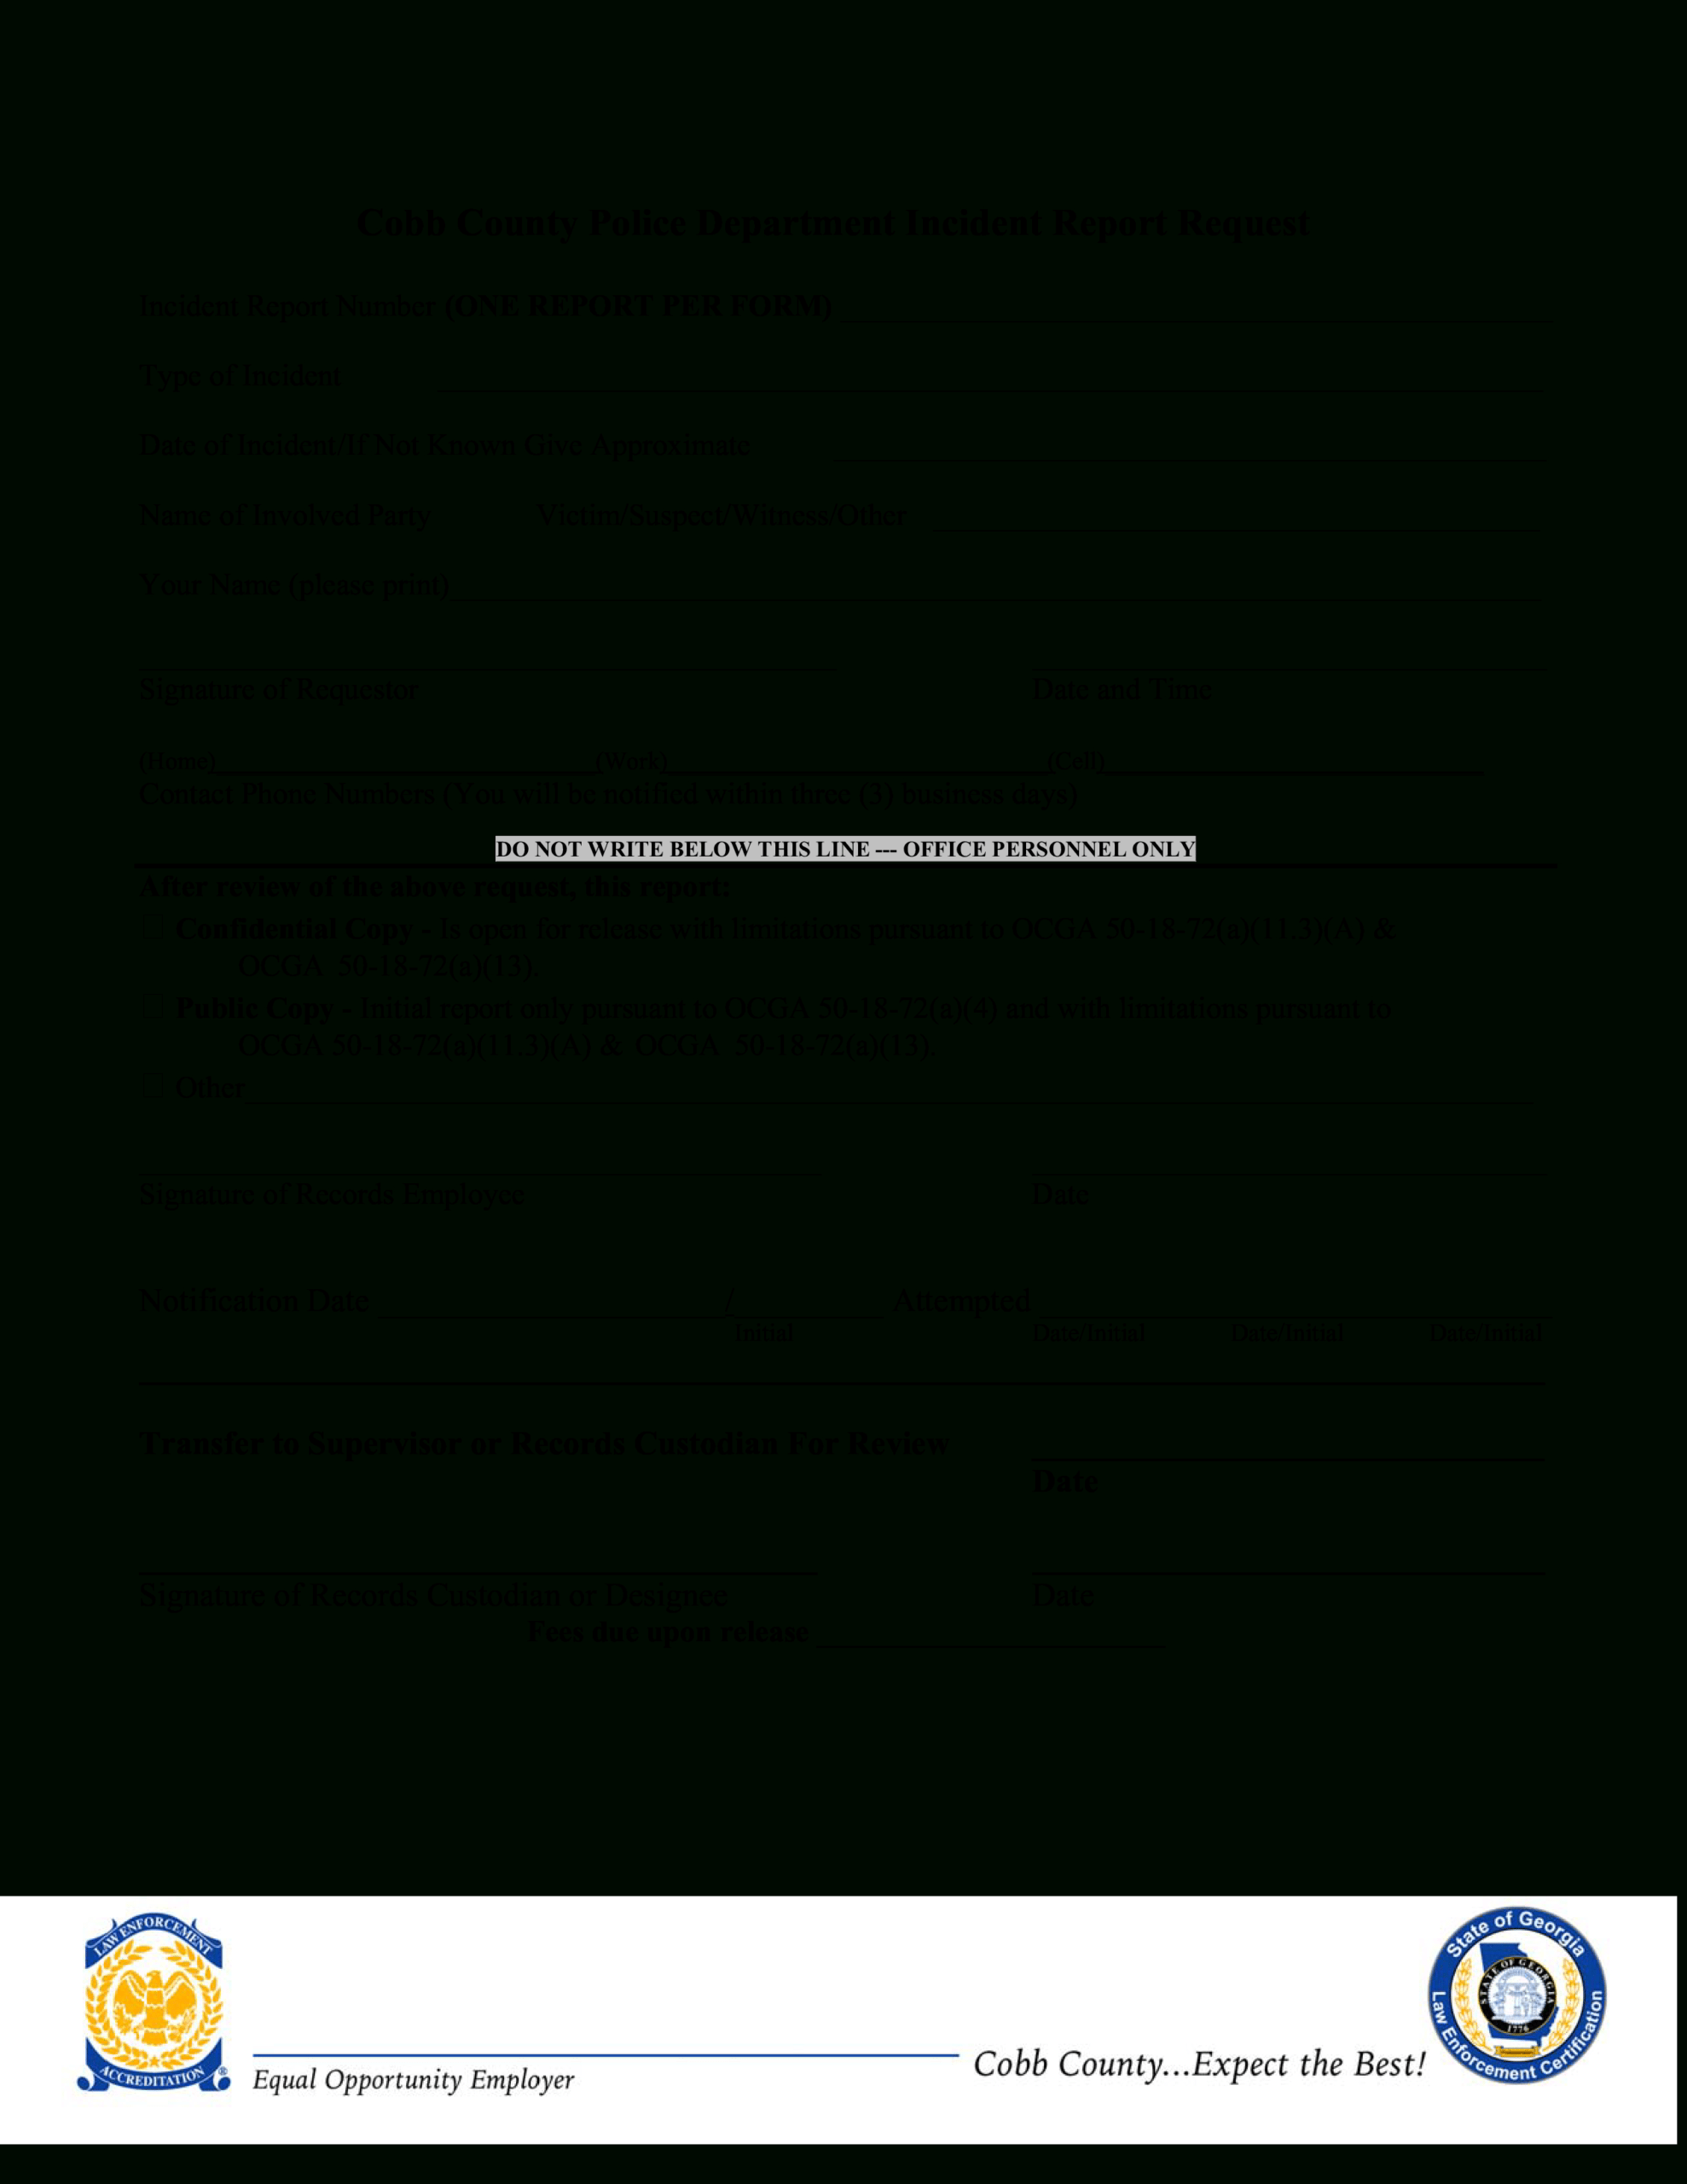 Blank Police Incident Report | Templates At Pertaining To Police Incident Report Template